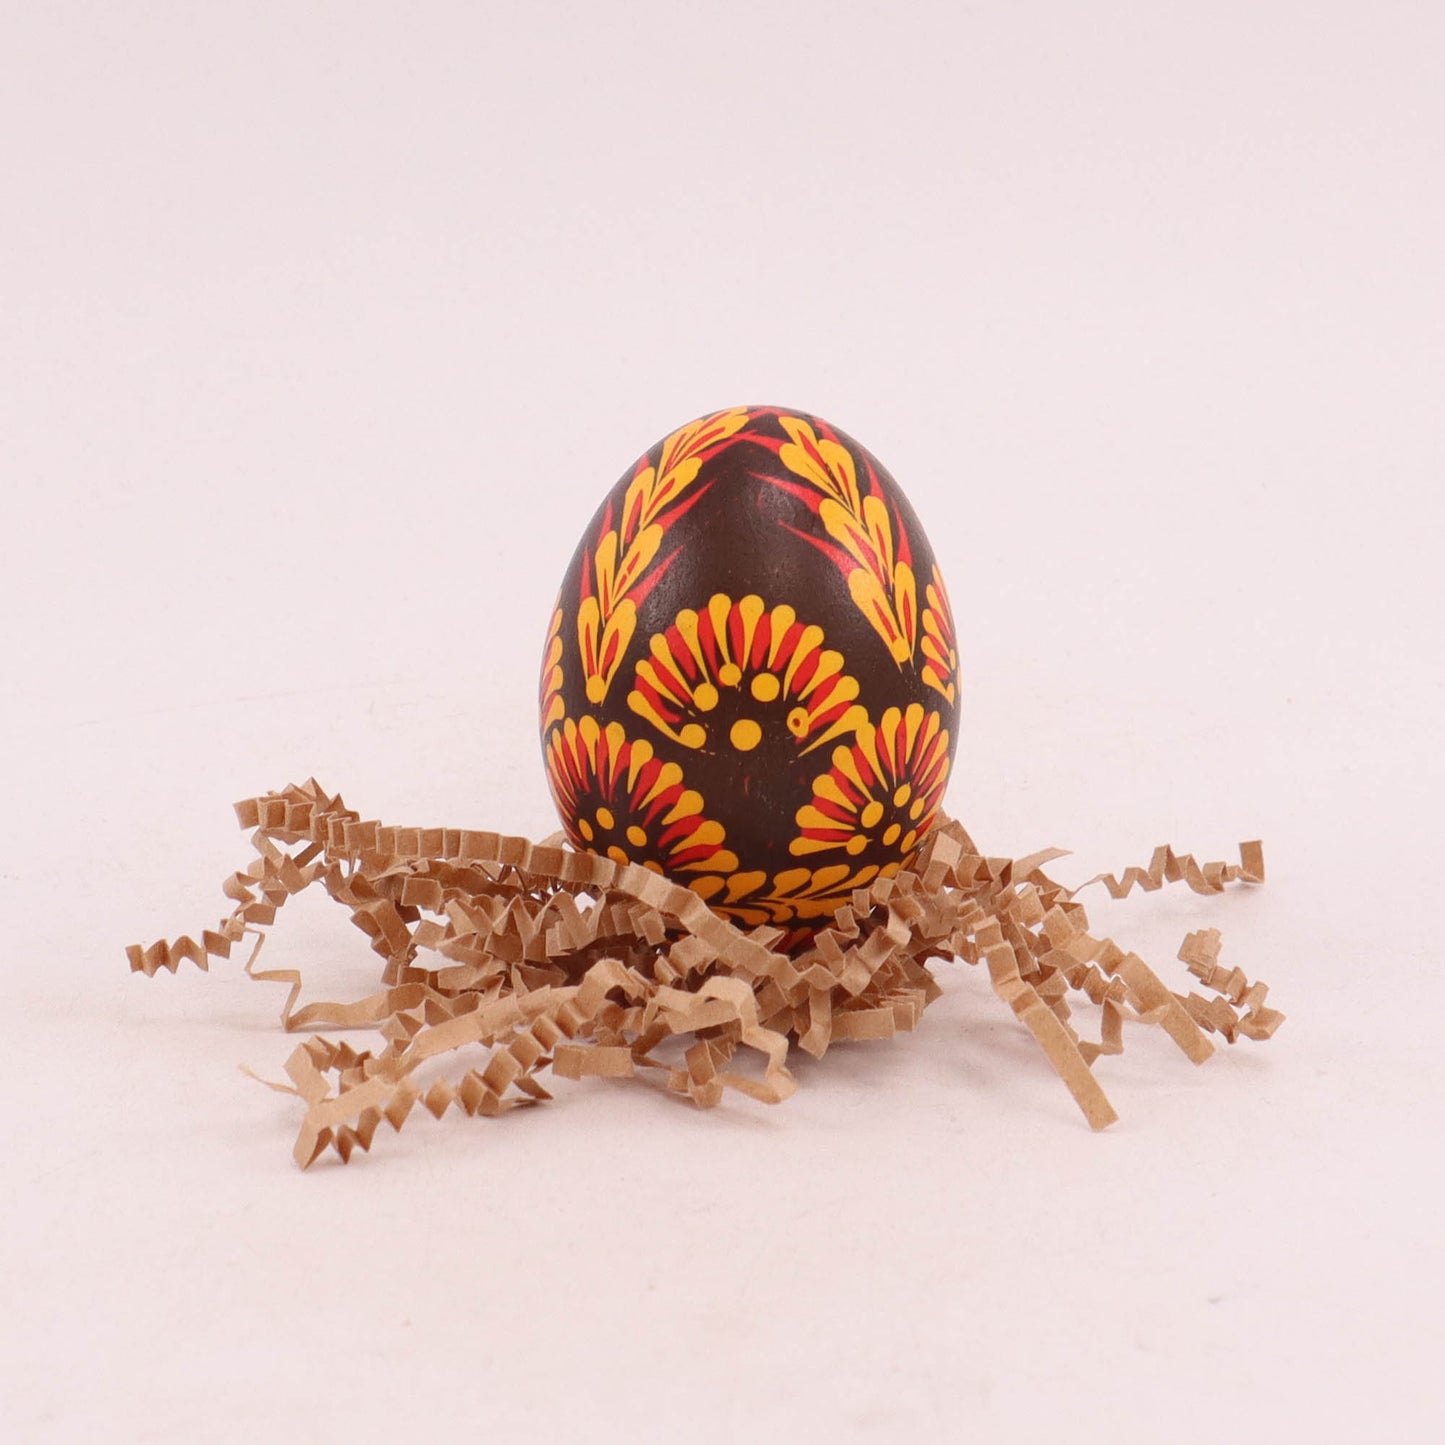 2"x2.5" Hand Painted Egg. Pattern: Red and Orange